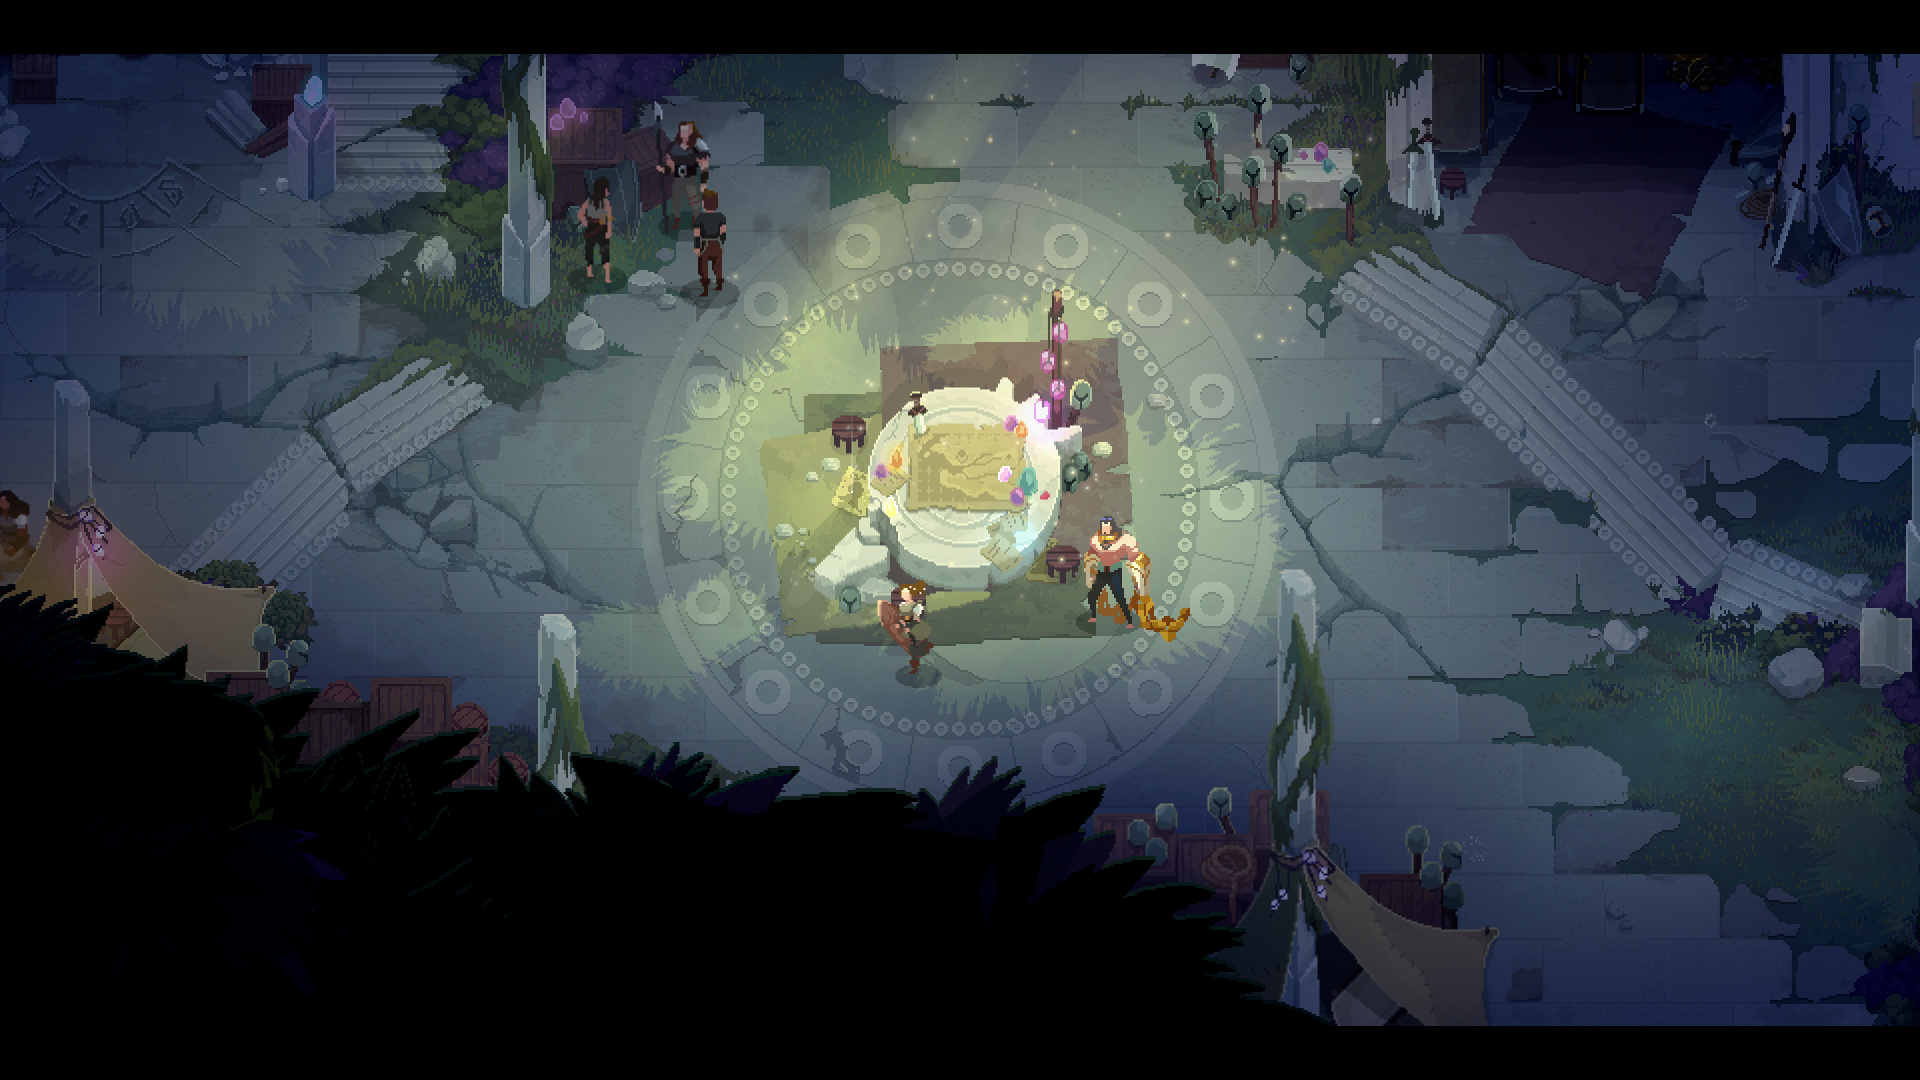 The Mageseeker review: an action RPG with a sleek combat loop - Polygon